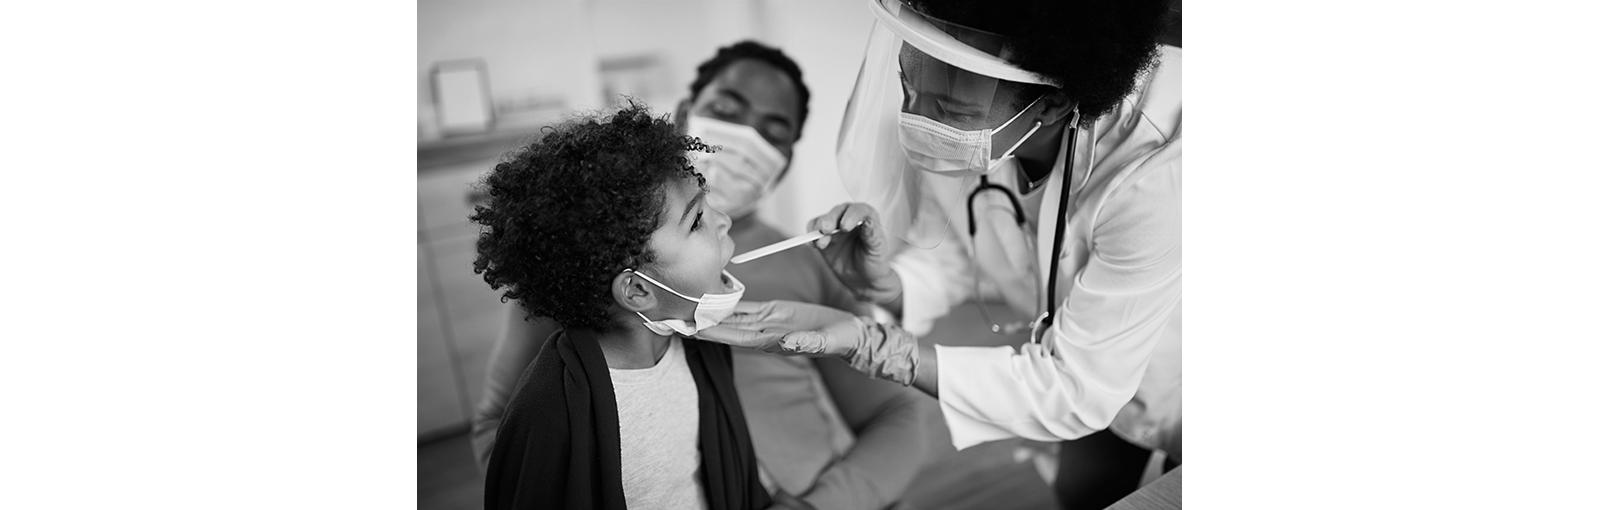 1287924870
Family doctor examining throat of a small black boy while visiting him at home during coronavirus pandemic.